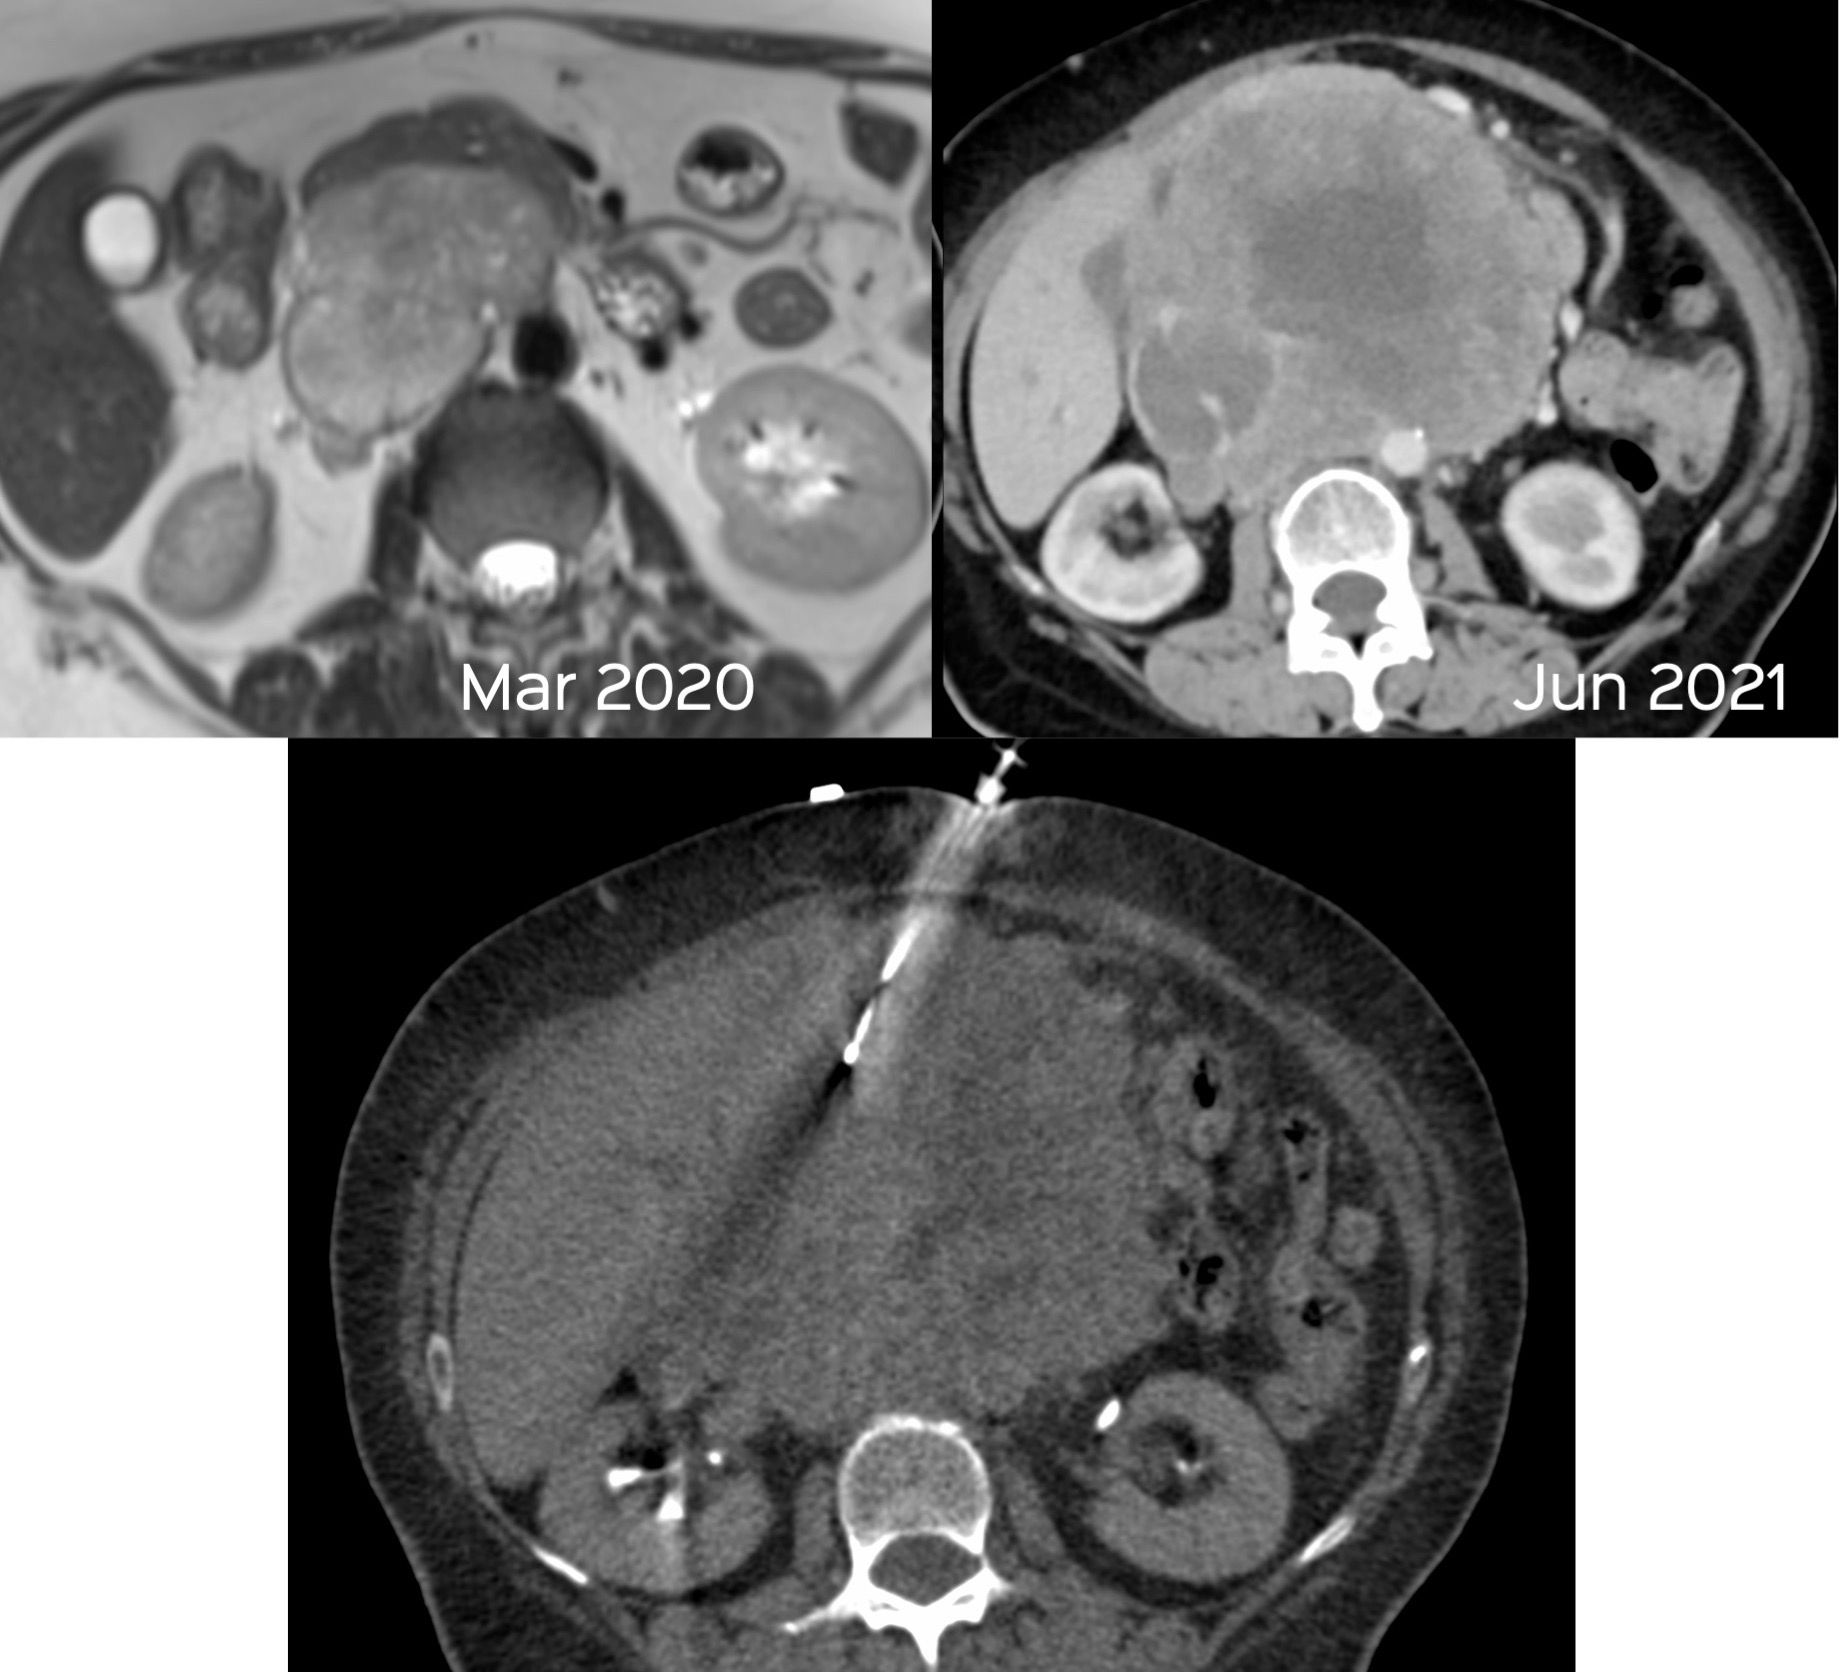 Case 44: IVC Leiomyosarcoma Biopsy – The Tragedy of “It Can’t Be Done” and “Covid-19” and "Procrastination”